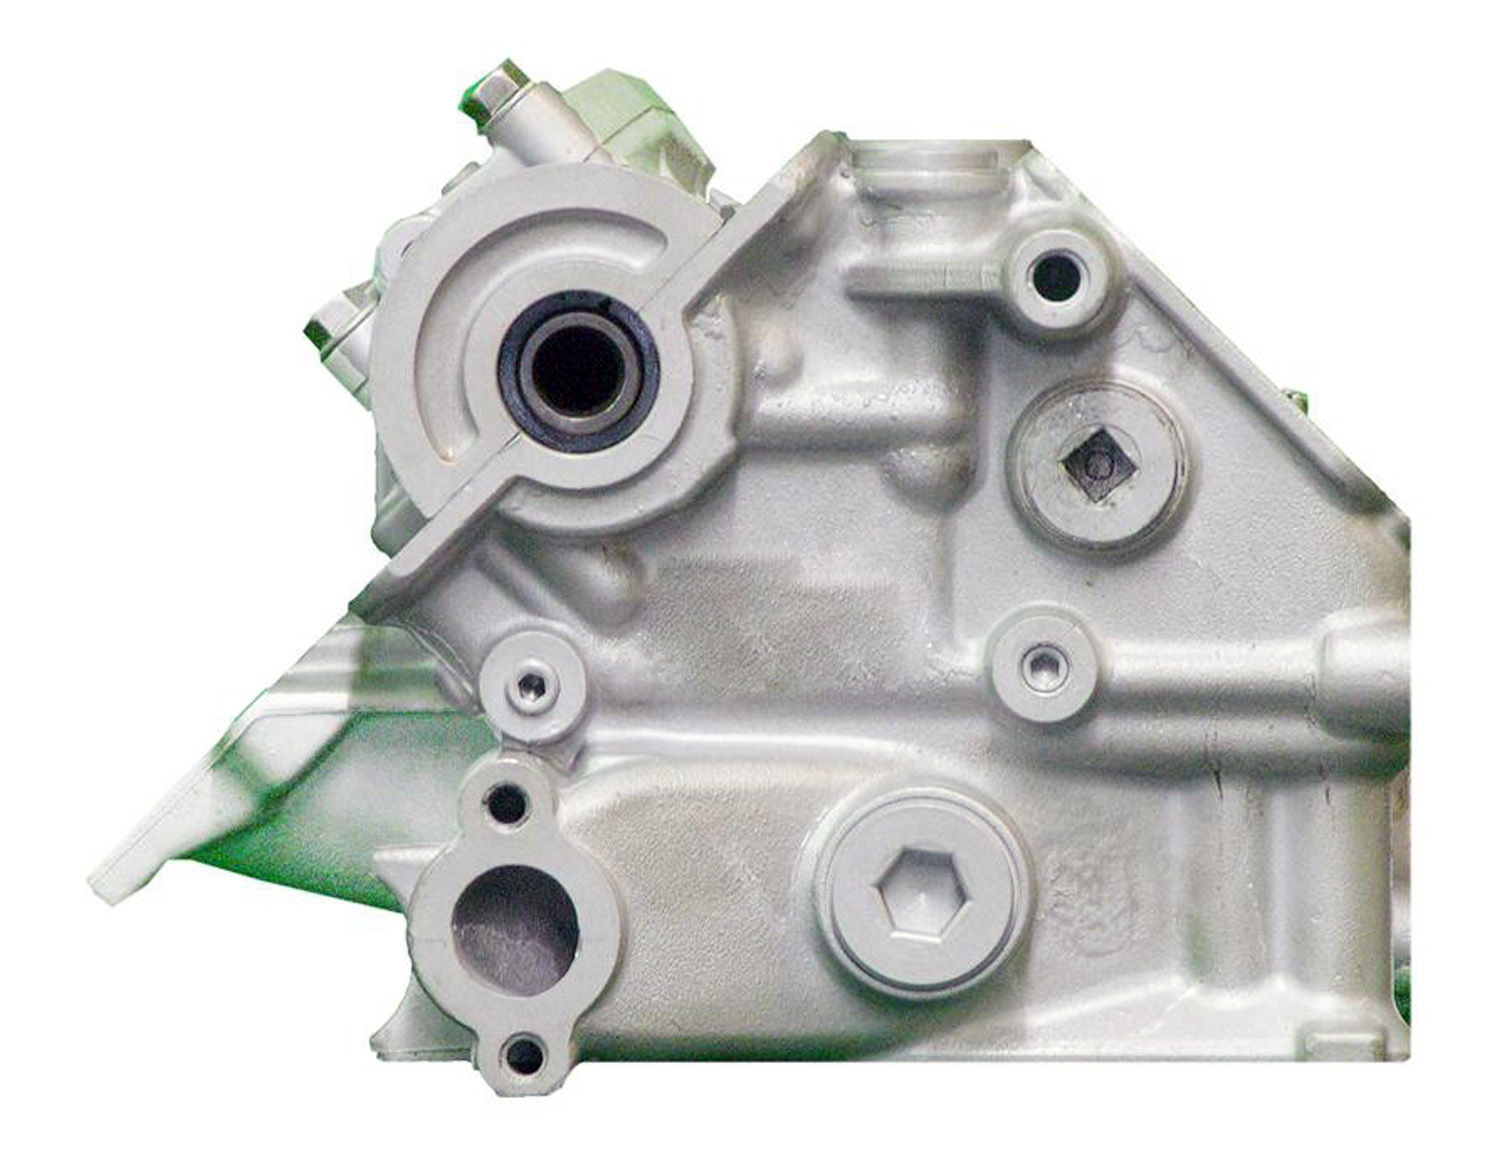 Acura 2.7 V6L Remanufactured Cylinder Head - 1987-1990 C27A1